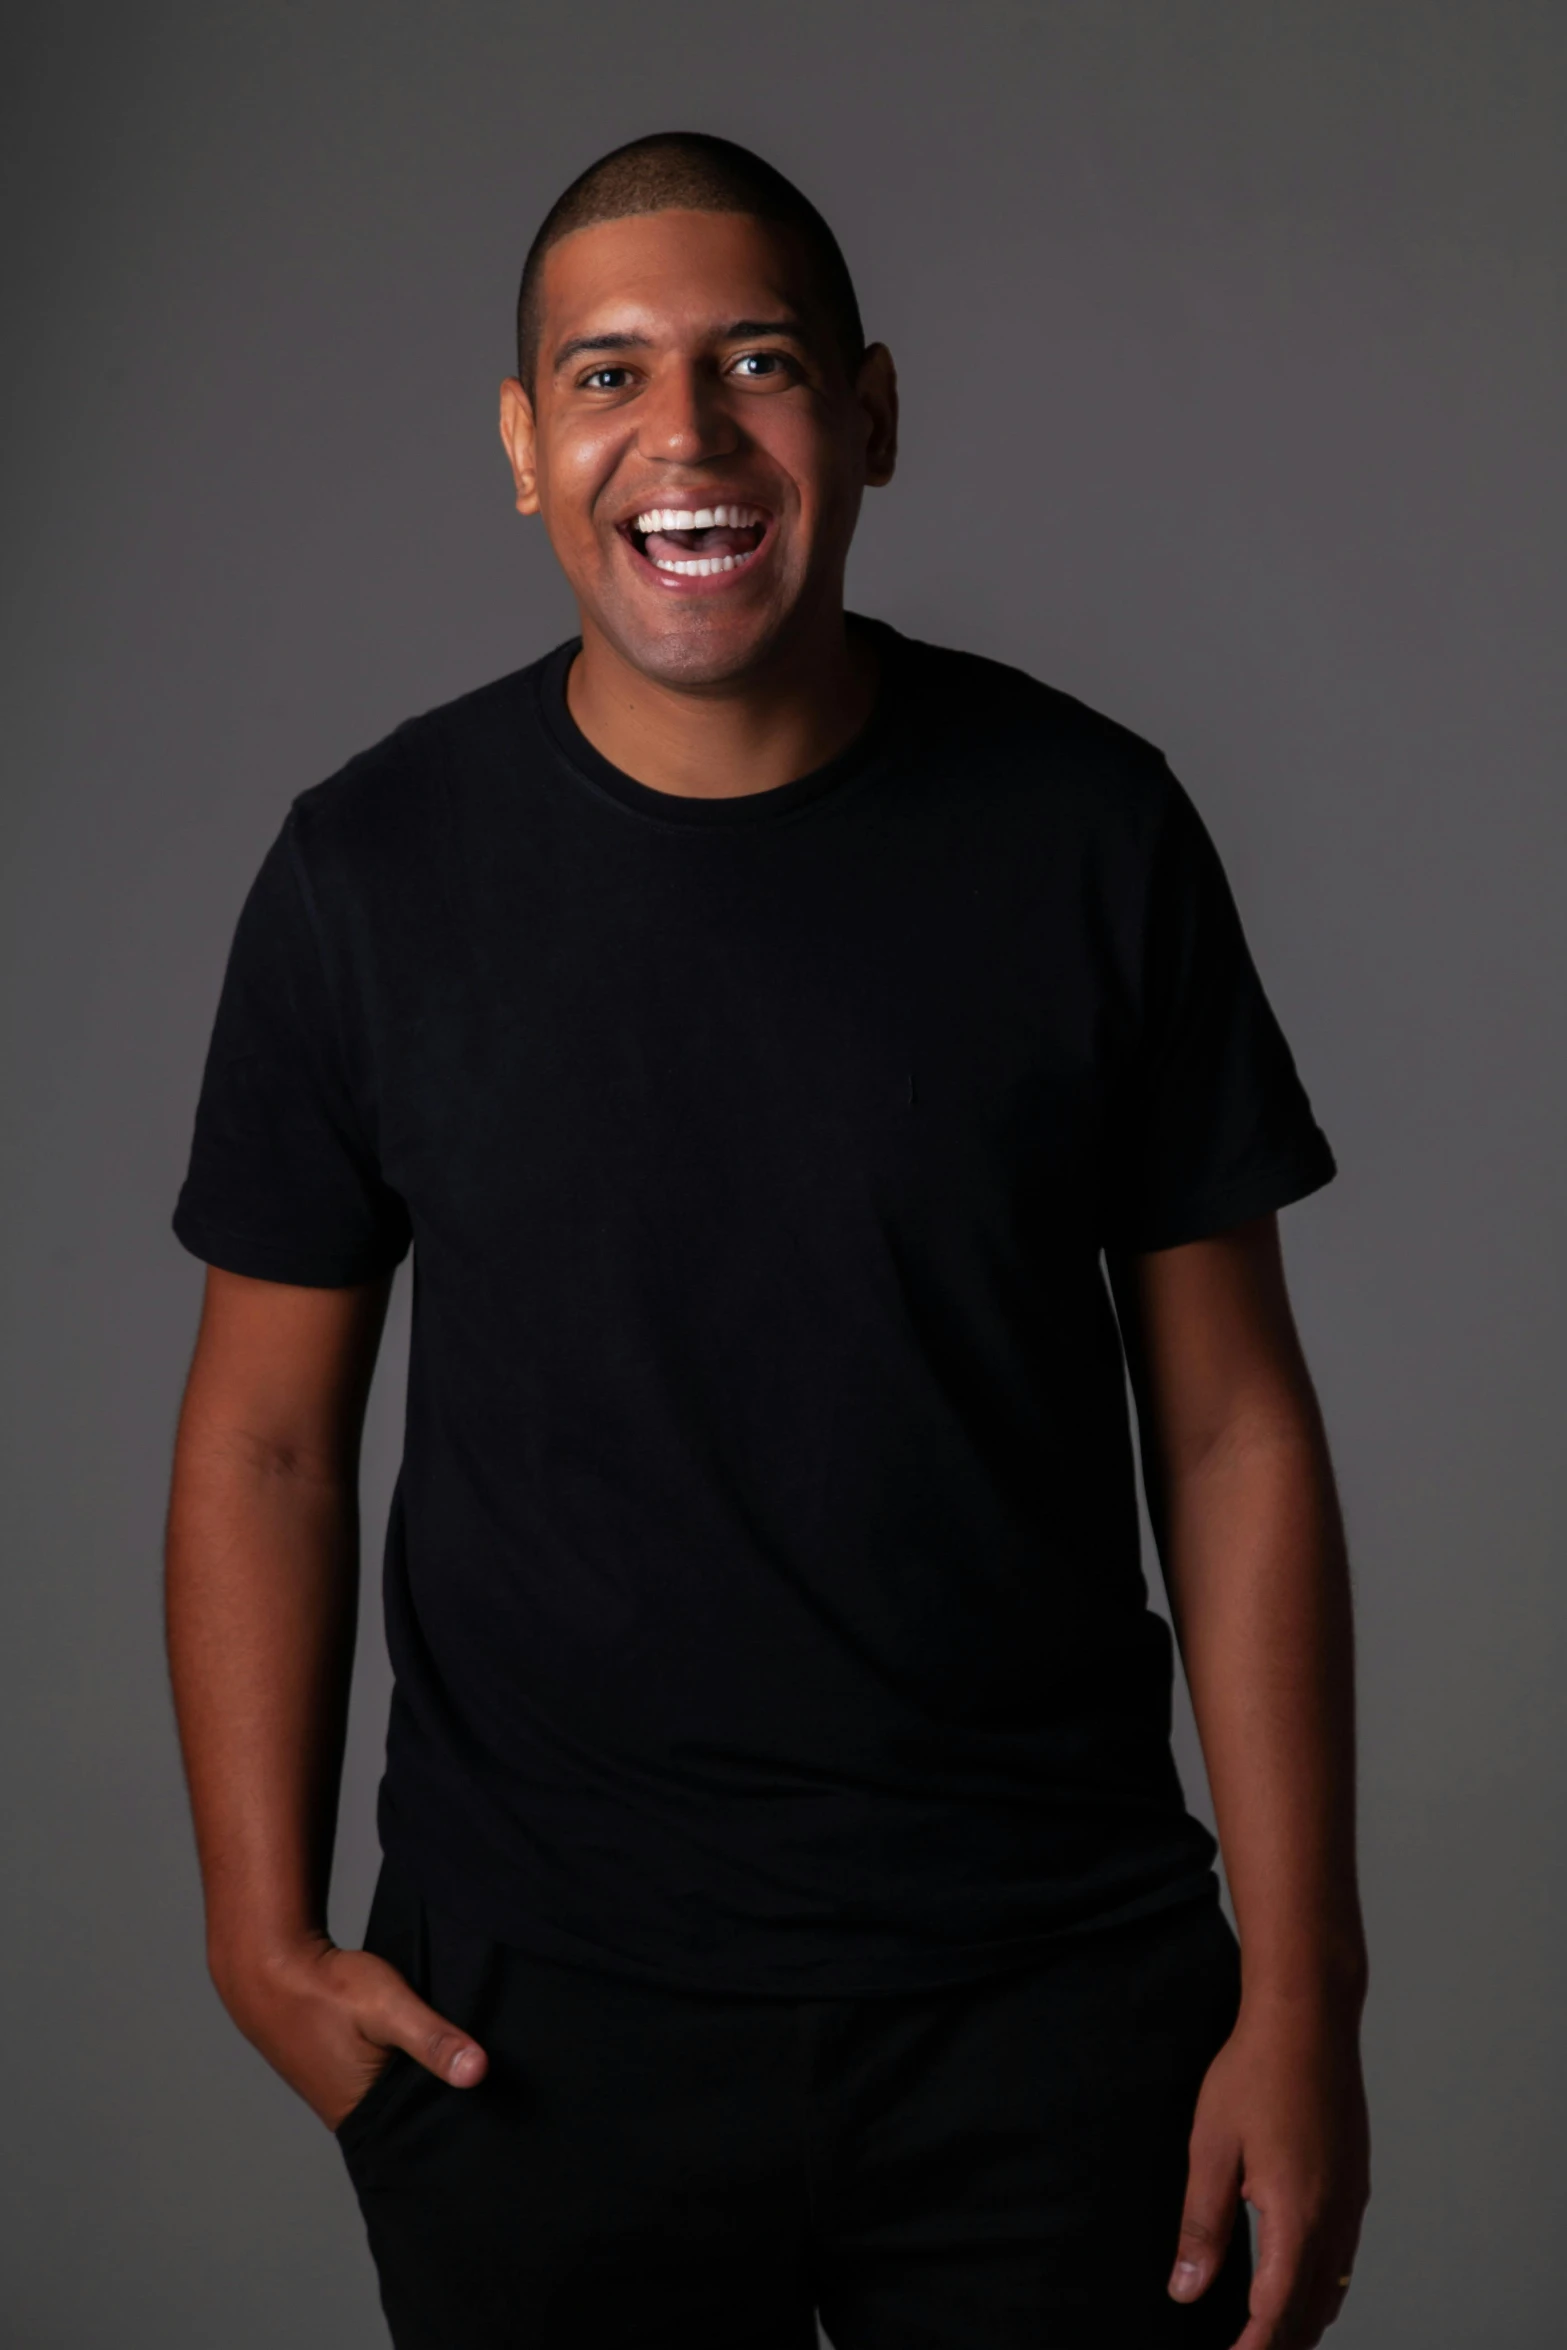 a man is smiling and wearing a black shirt